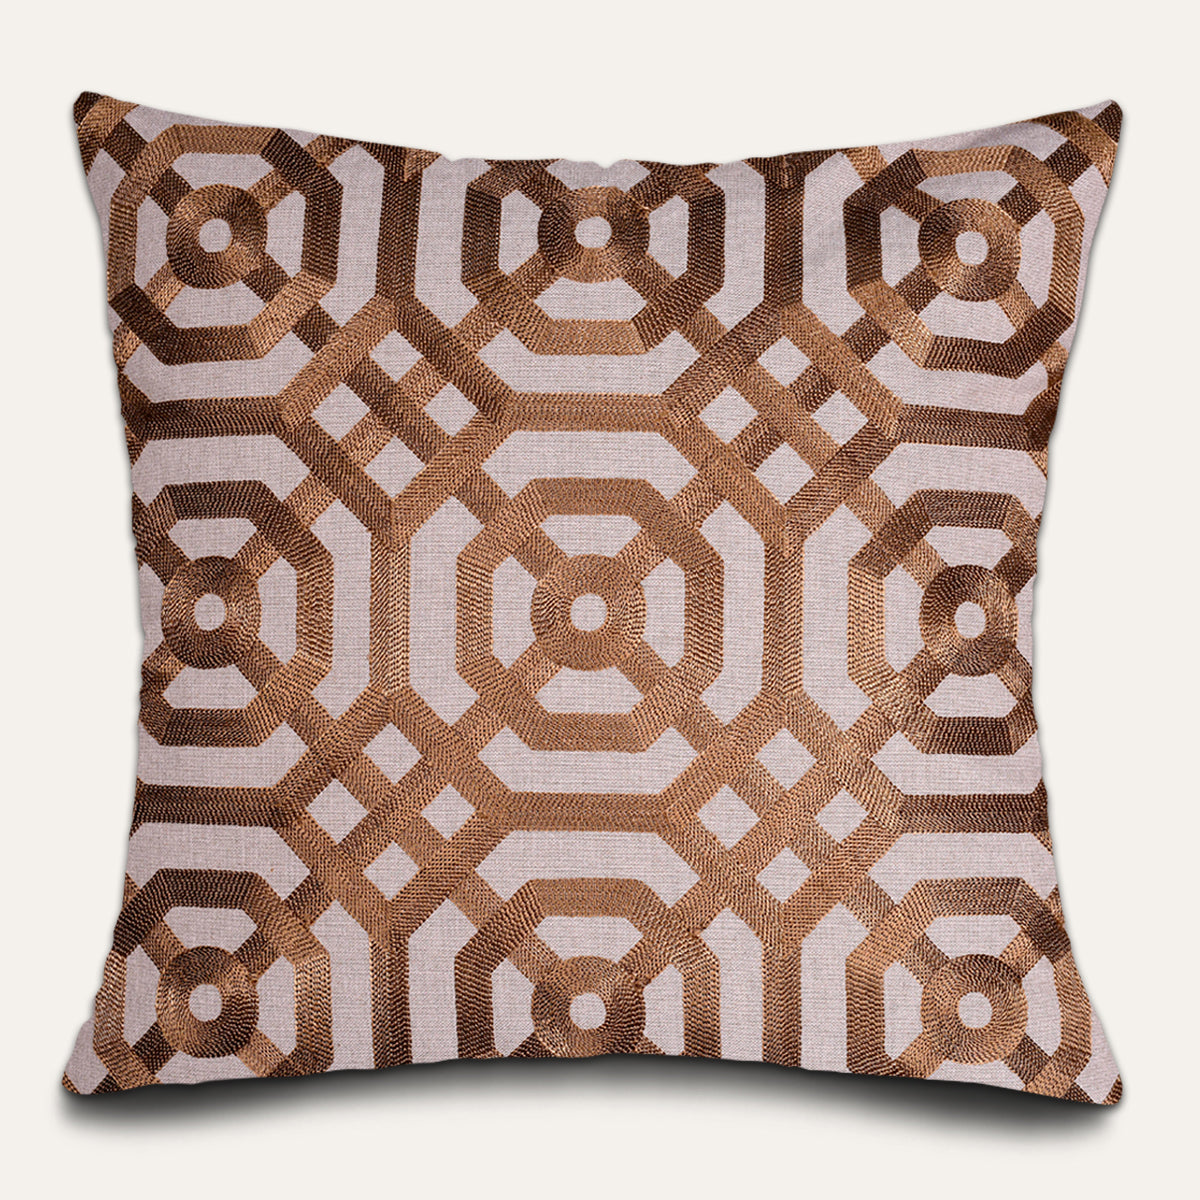 Brown Throw Pillow Covers - 20 x 20 inches - Decozen